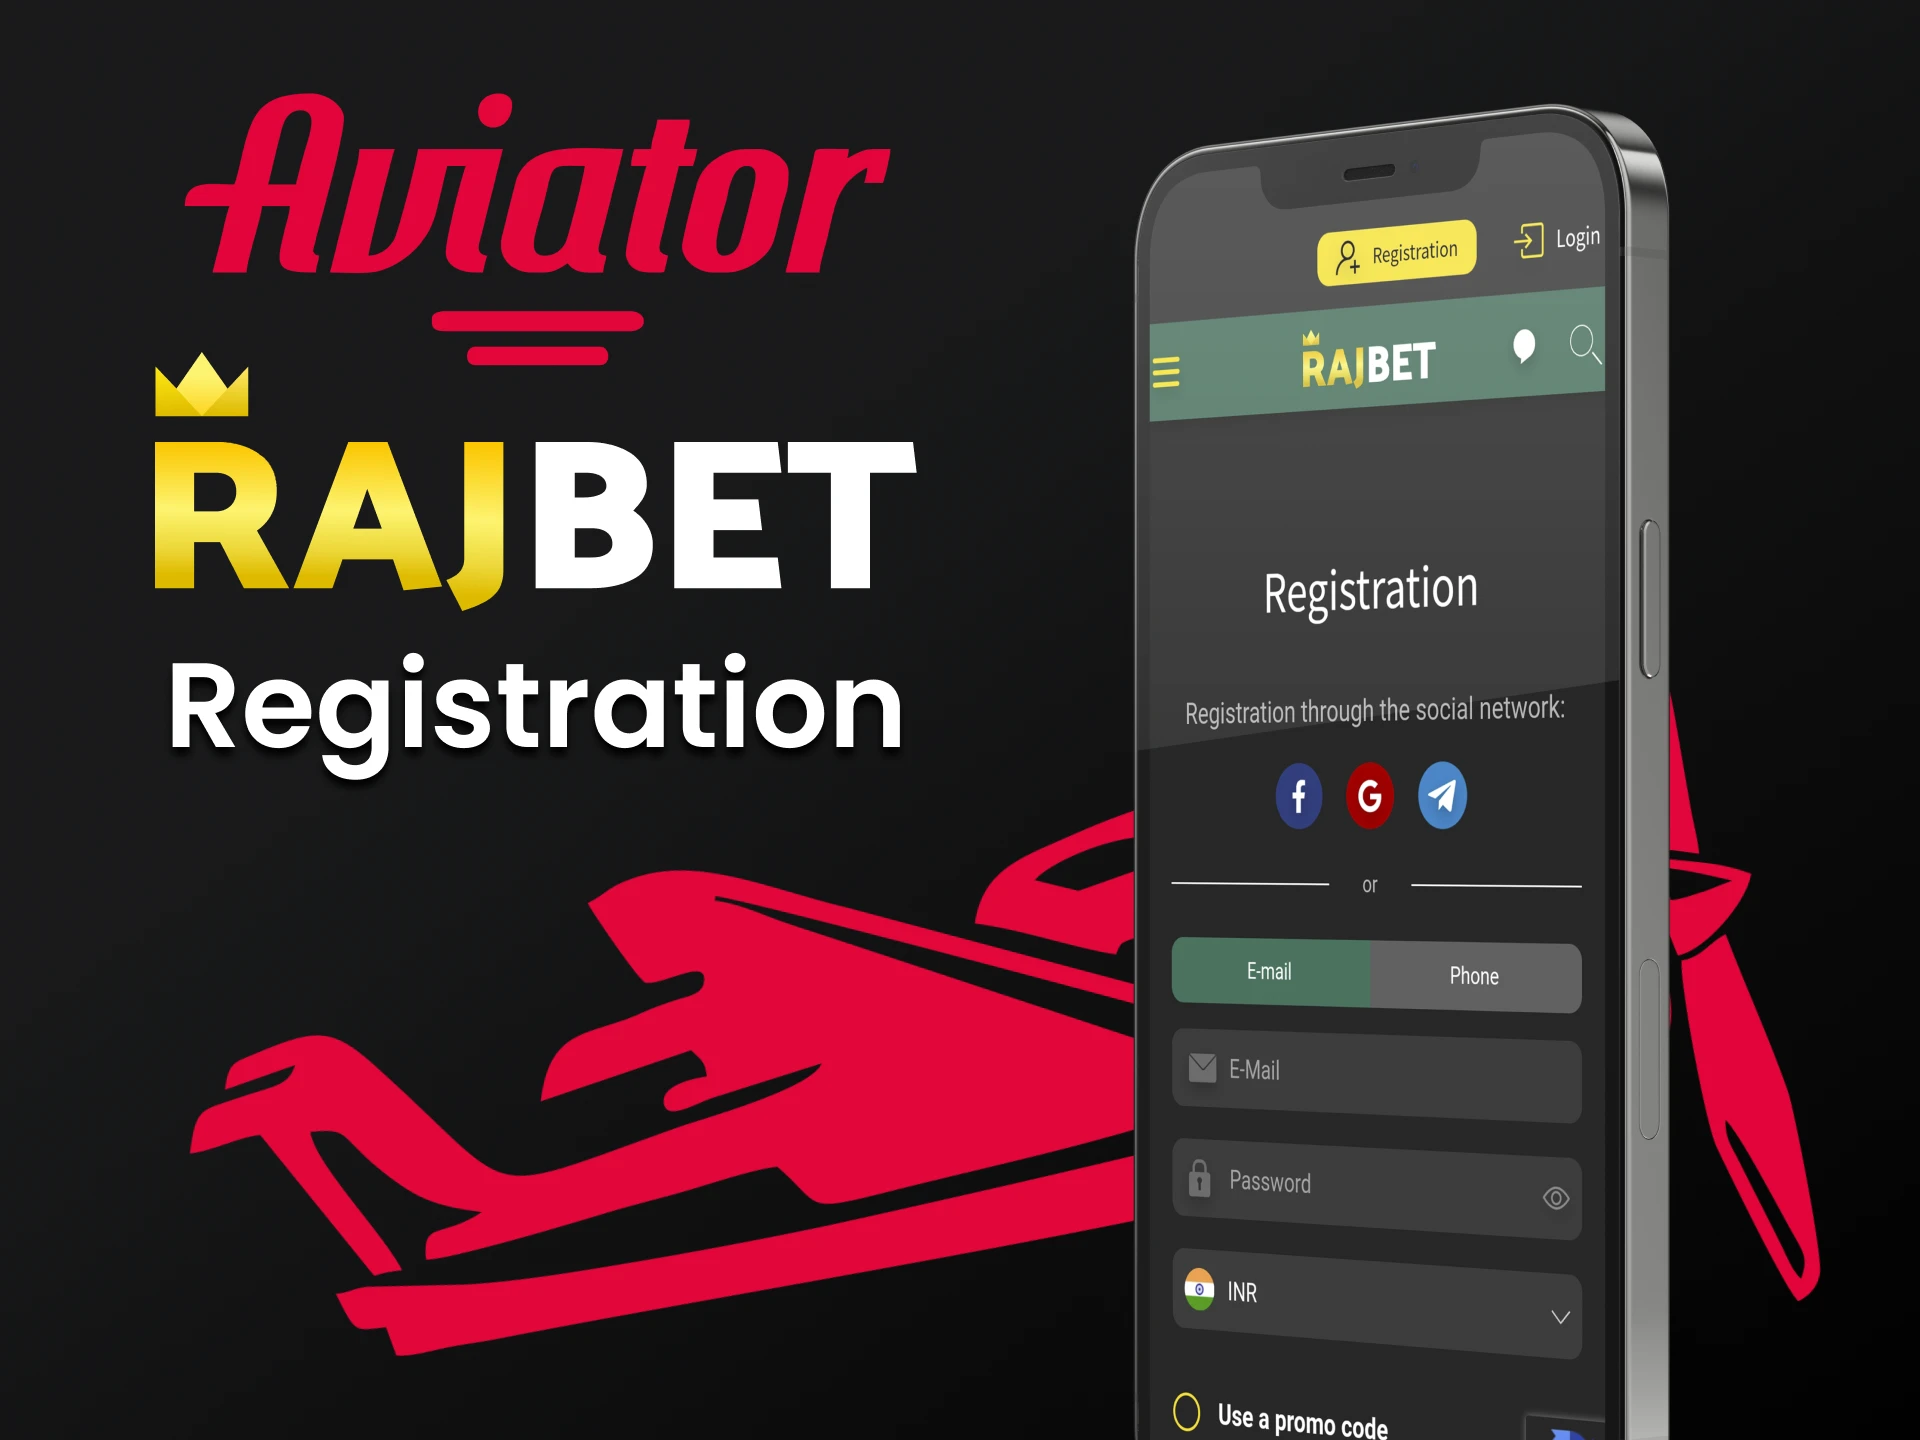 You can complete the registration process for playing Aviator right in the Rajbet app.